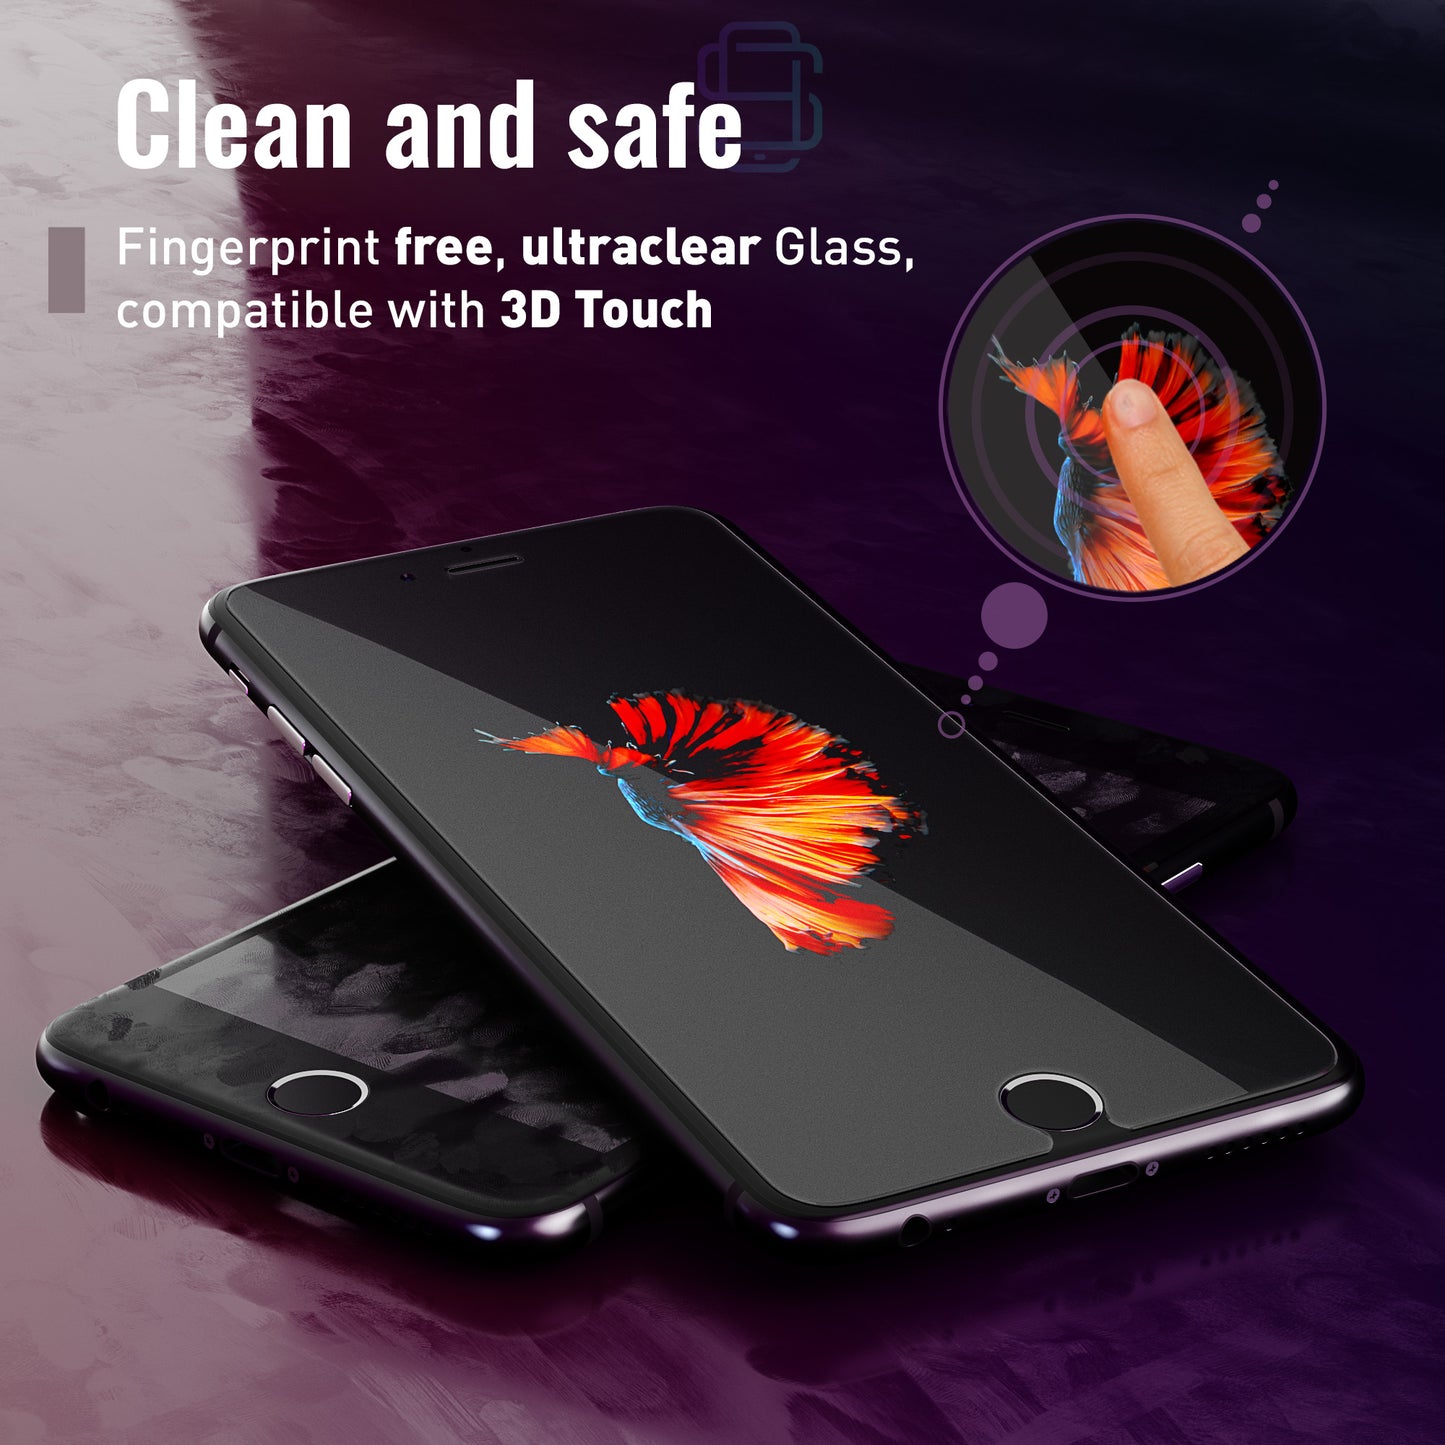 Defenslim iPhone 6s Screen Protector [2-Pack] with Easy Auto-Align Install Kit